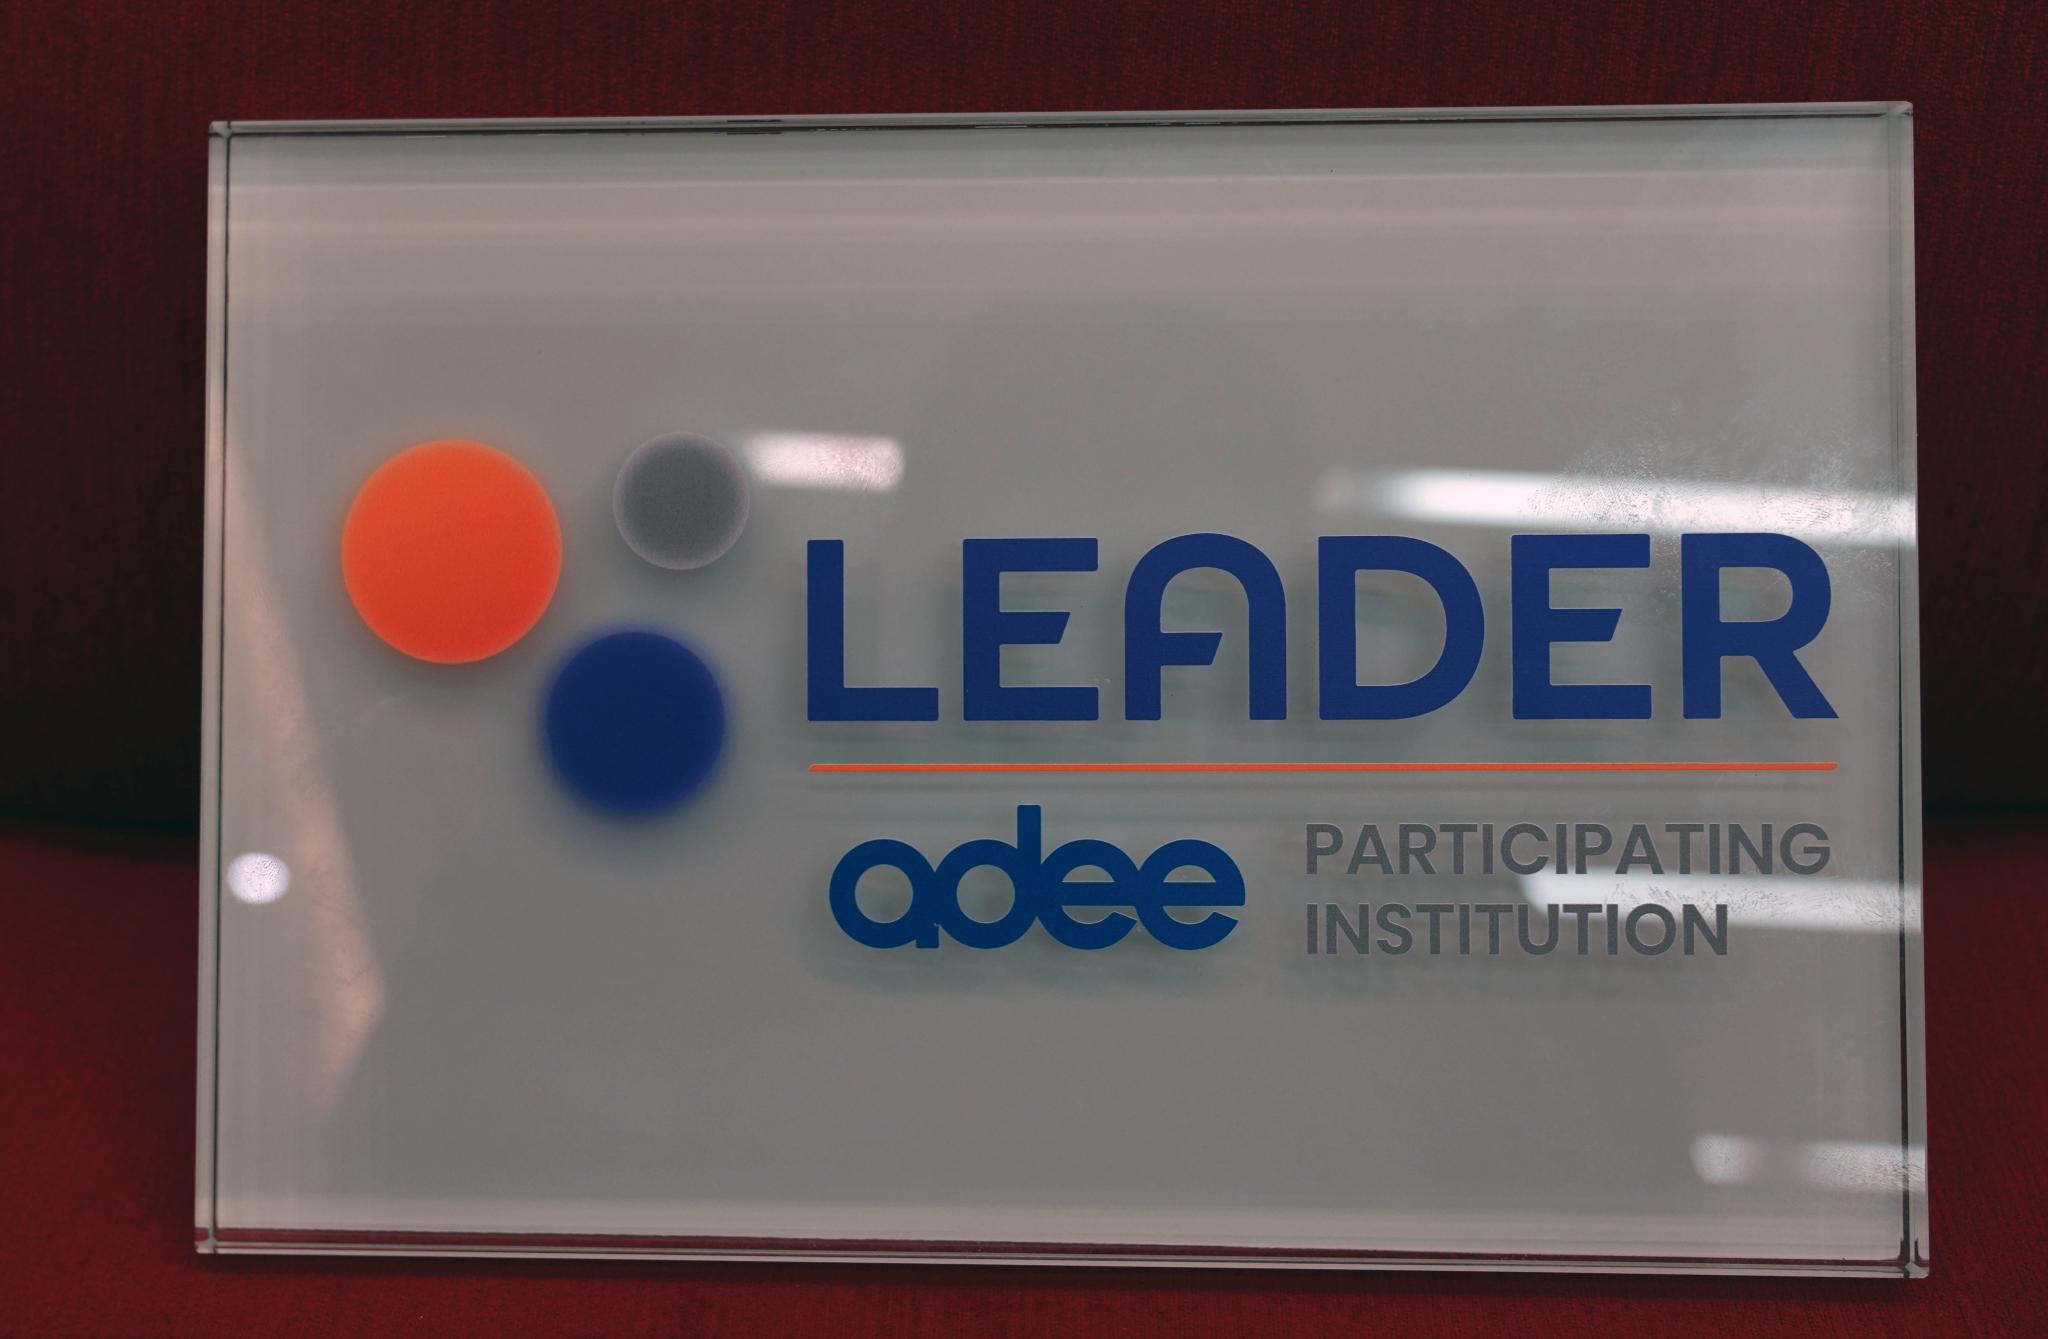 The Faculty of Dentistry at the ϲͶעapp Officially Receives the International ADEE Leader Accreditation